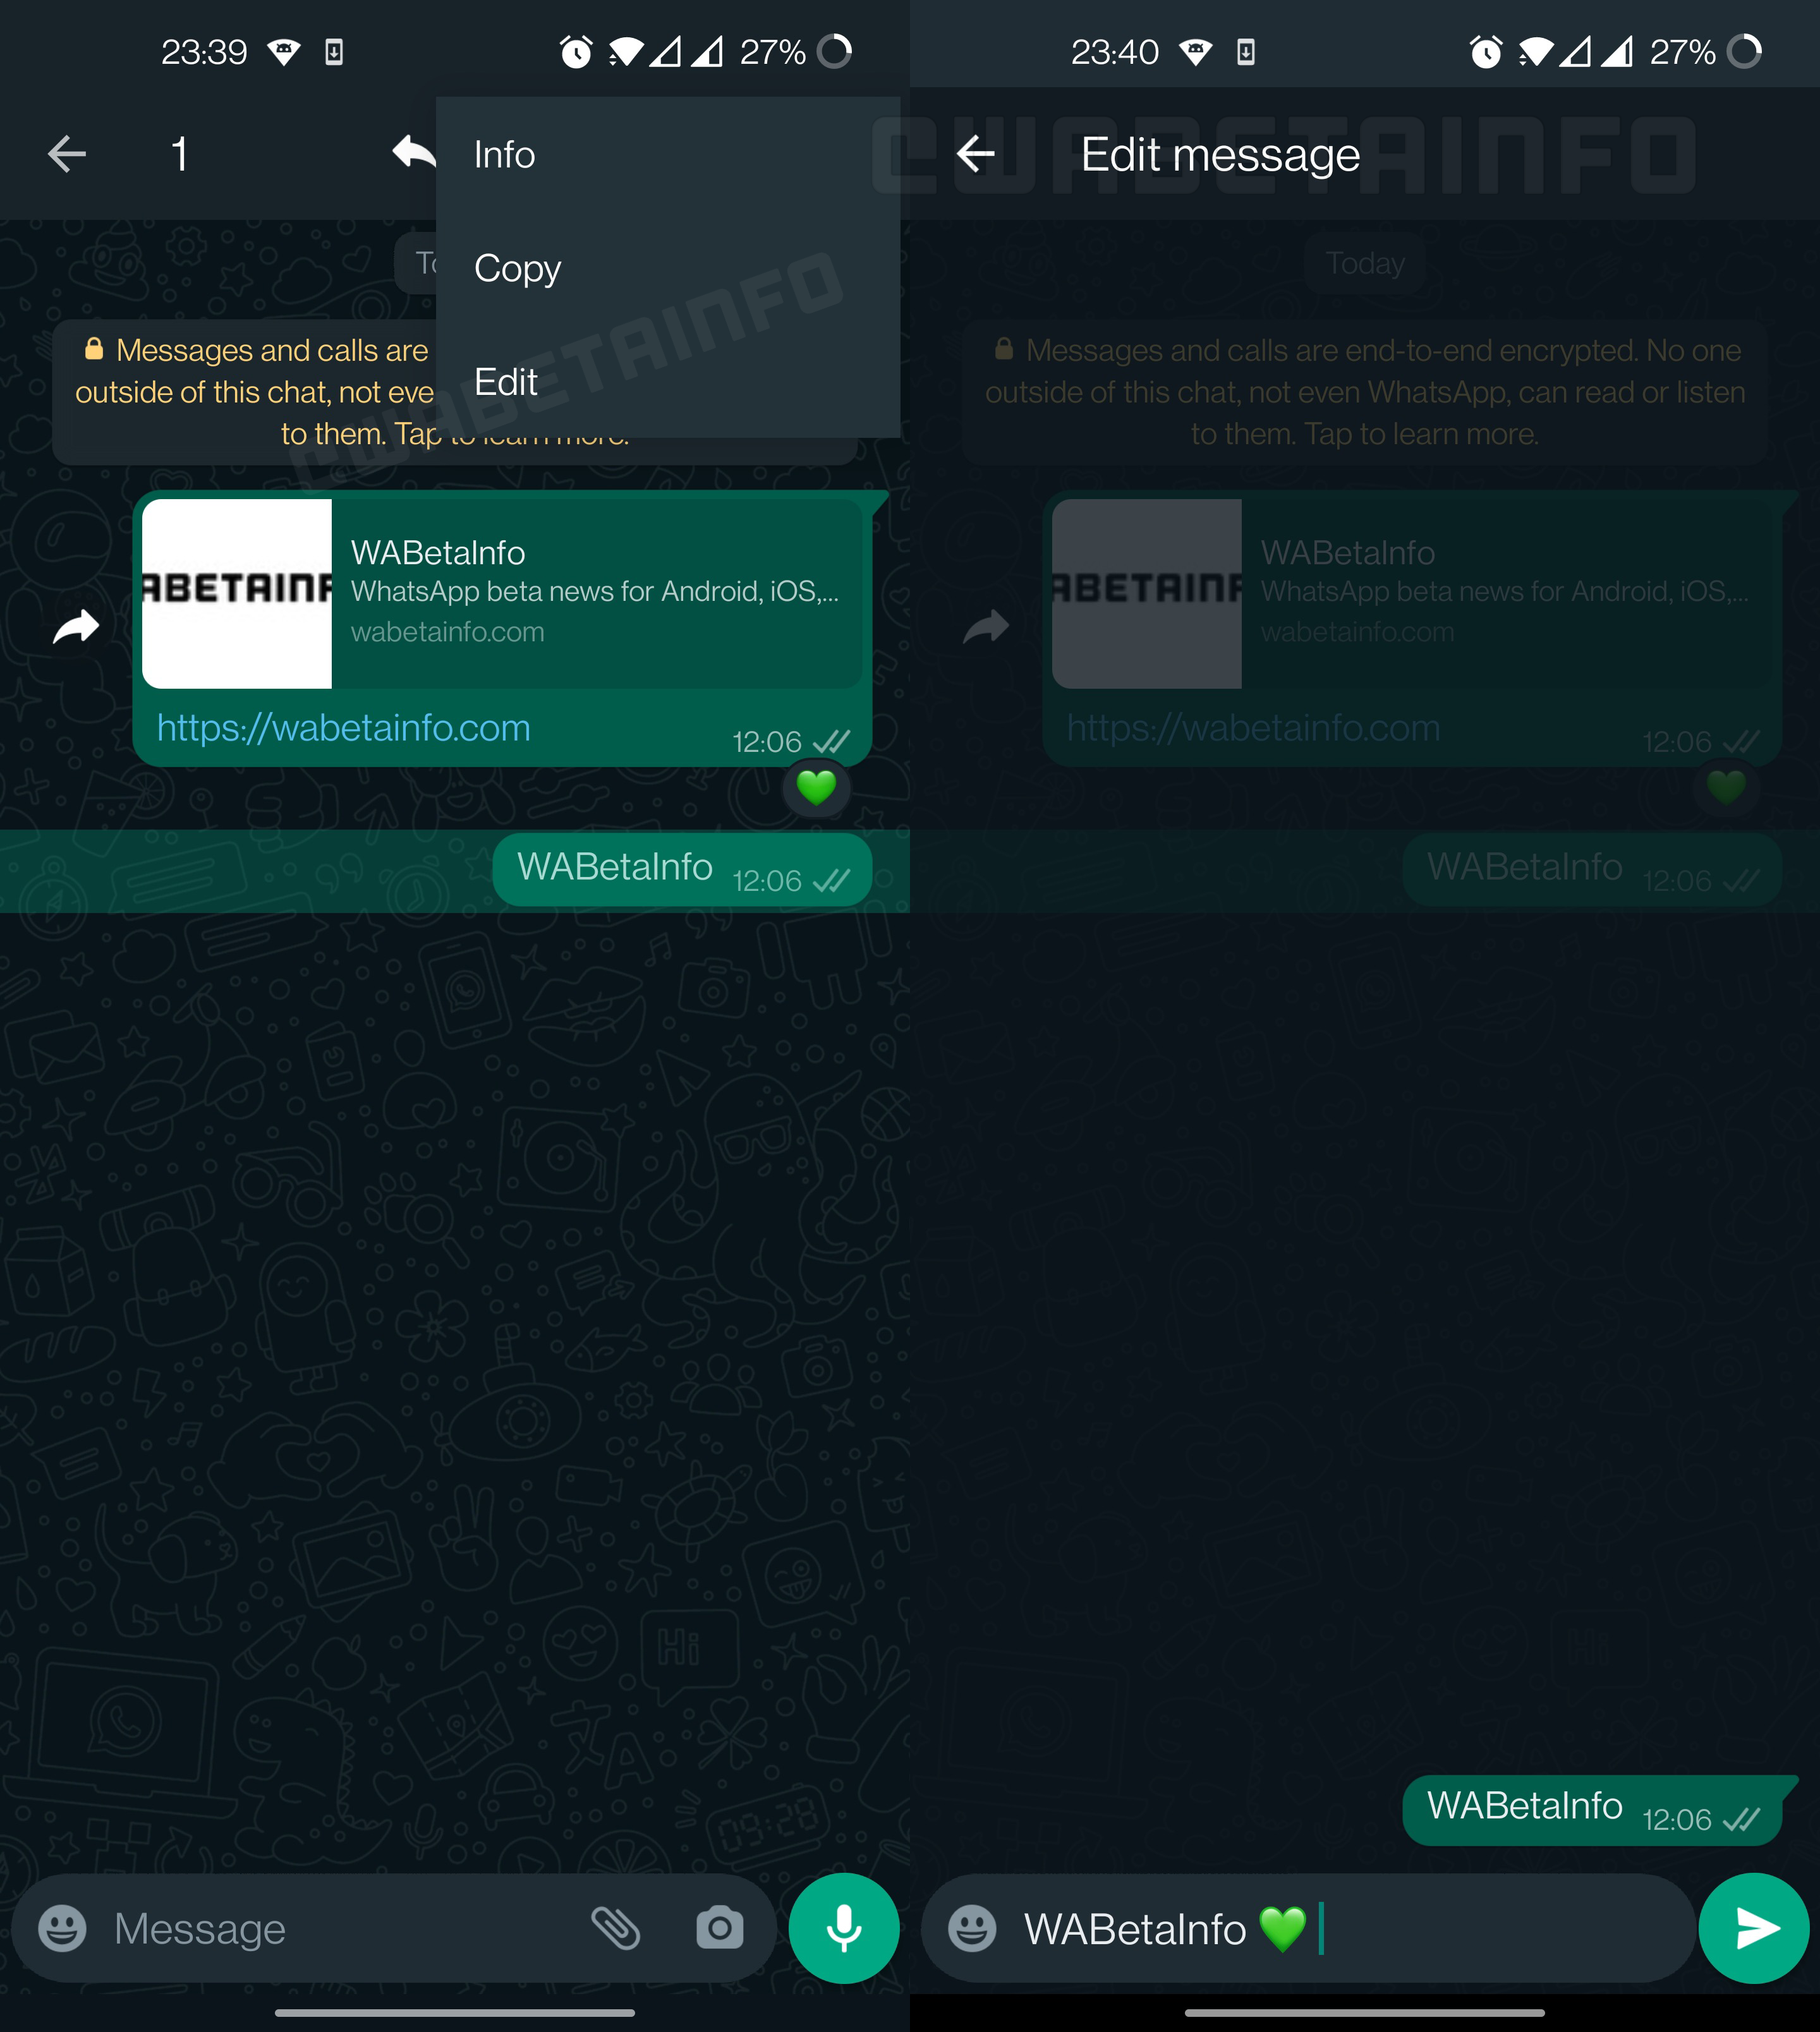 Screenshot of WhatsApp edit message being tested